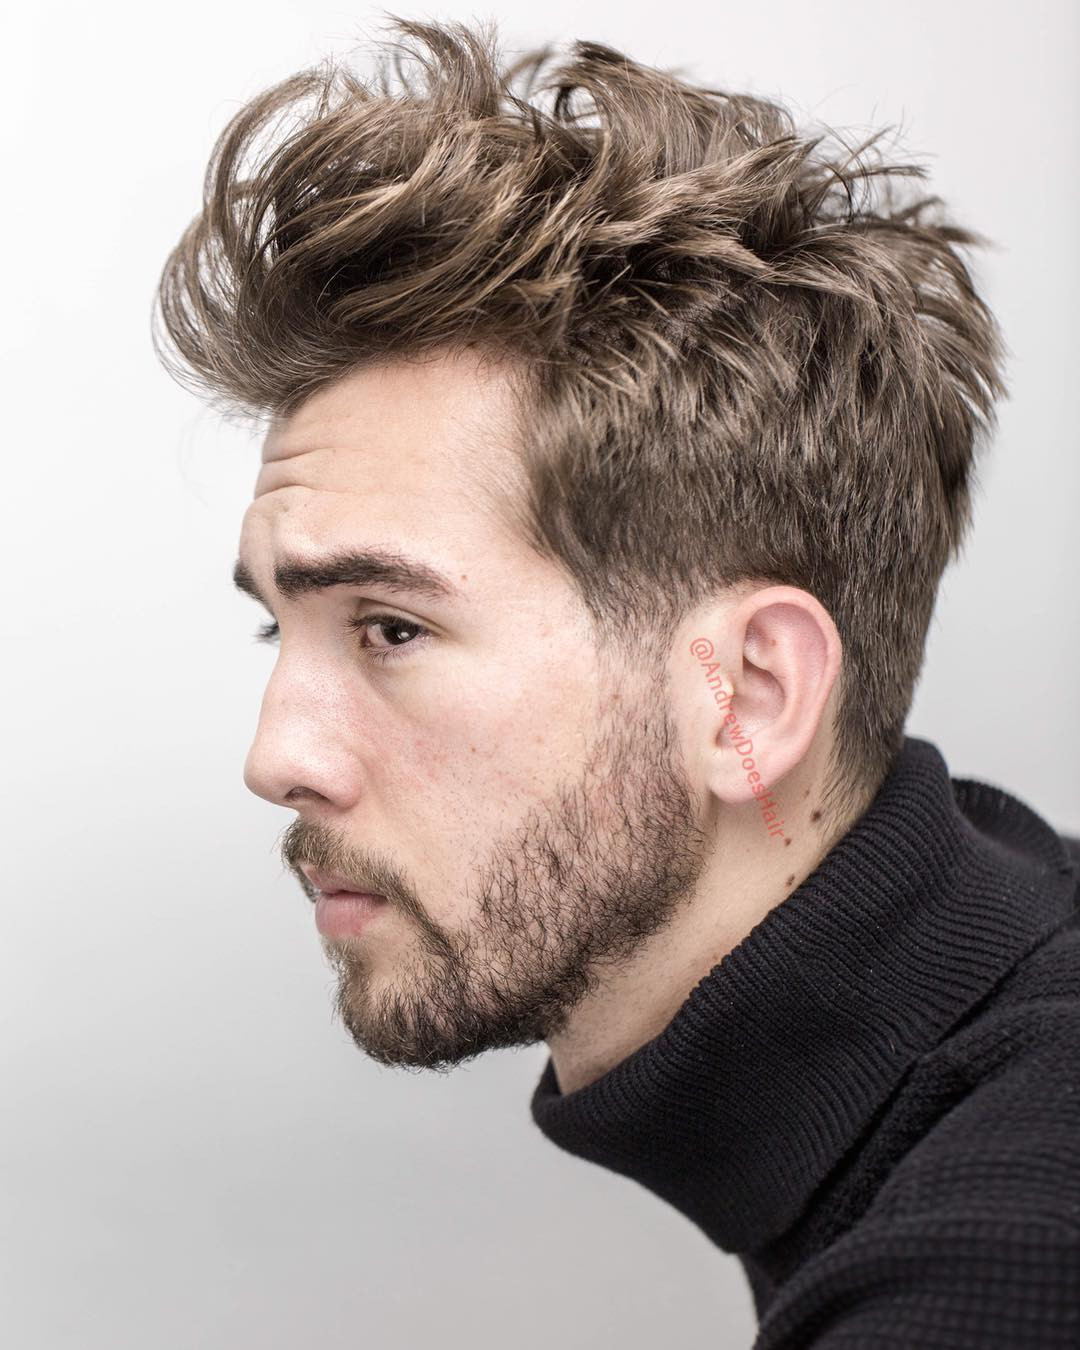 Mens Mid Length Haircuts
 The 60 Best Medium Length Hairstyles for Men